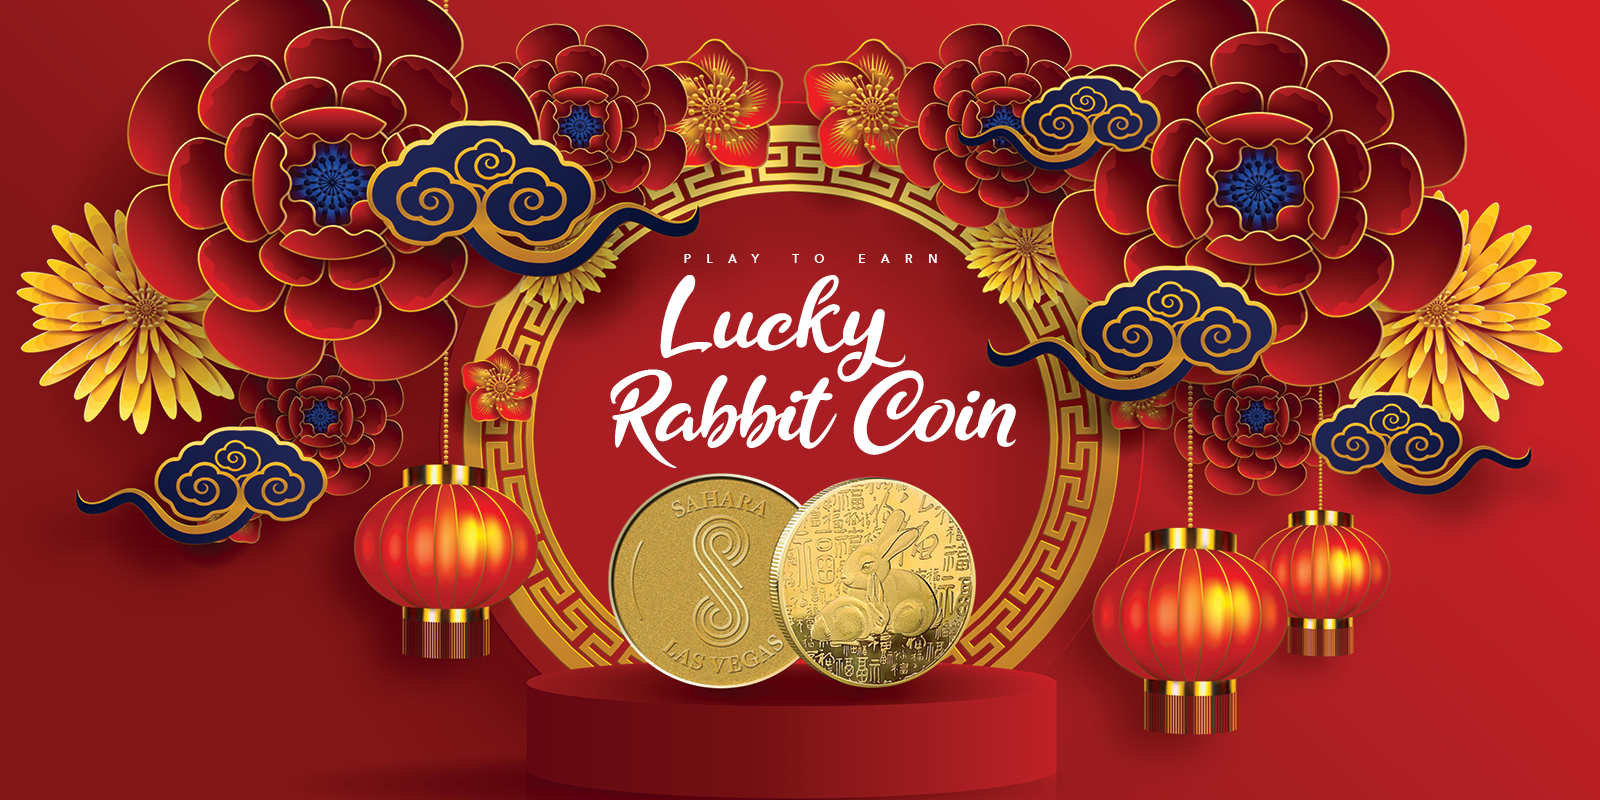 Lucky Rabbit Coin with a Chinese esthetic and floral elements surrounding the gold coin